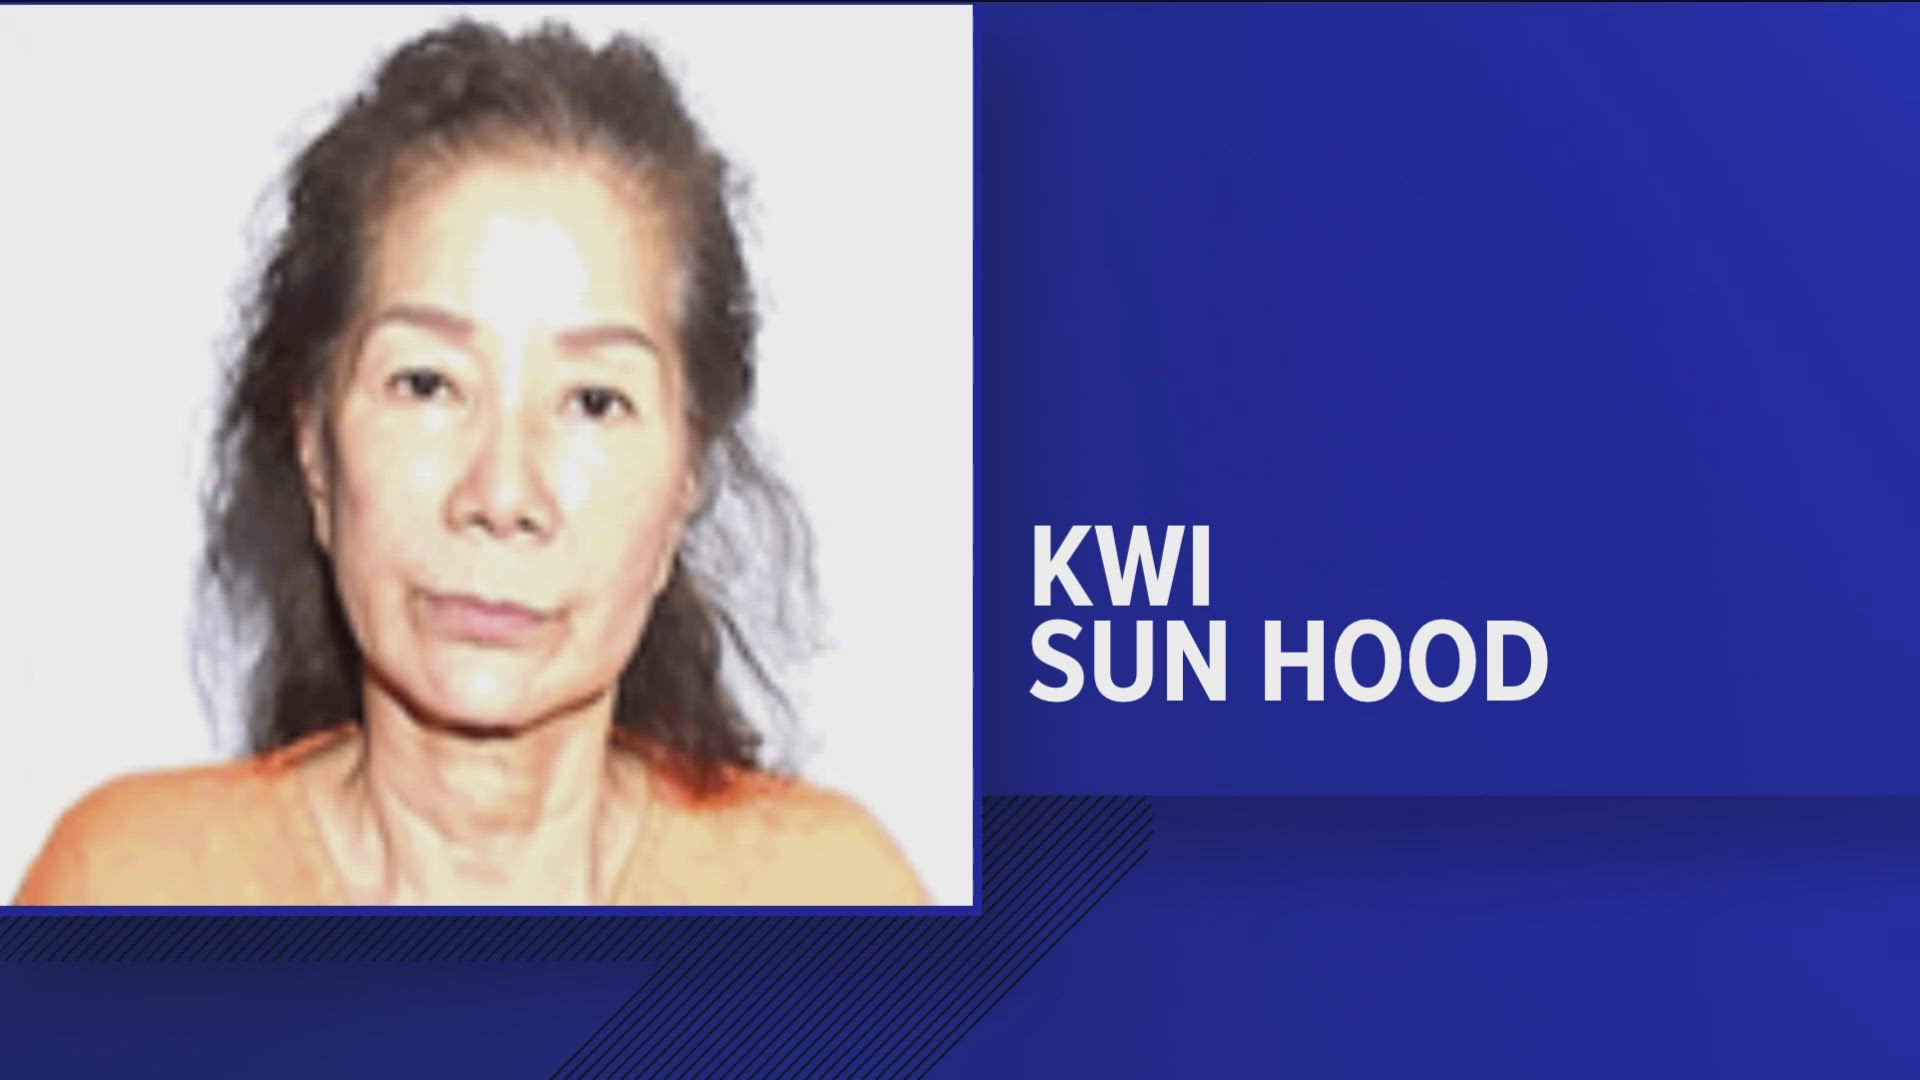 Kwi Sun Hood was arrested in September. Police say she admitted to managing a brothel when they raided a massage parlor.